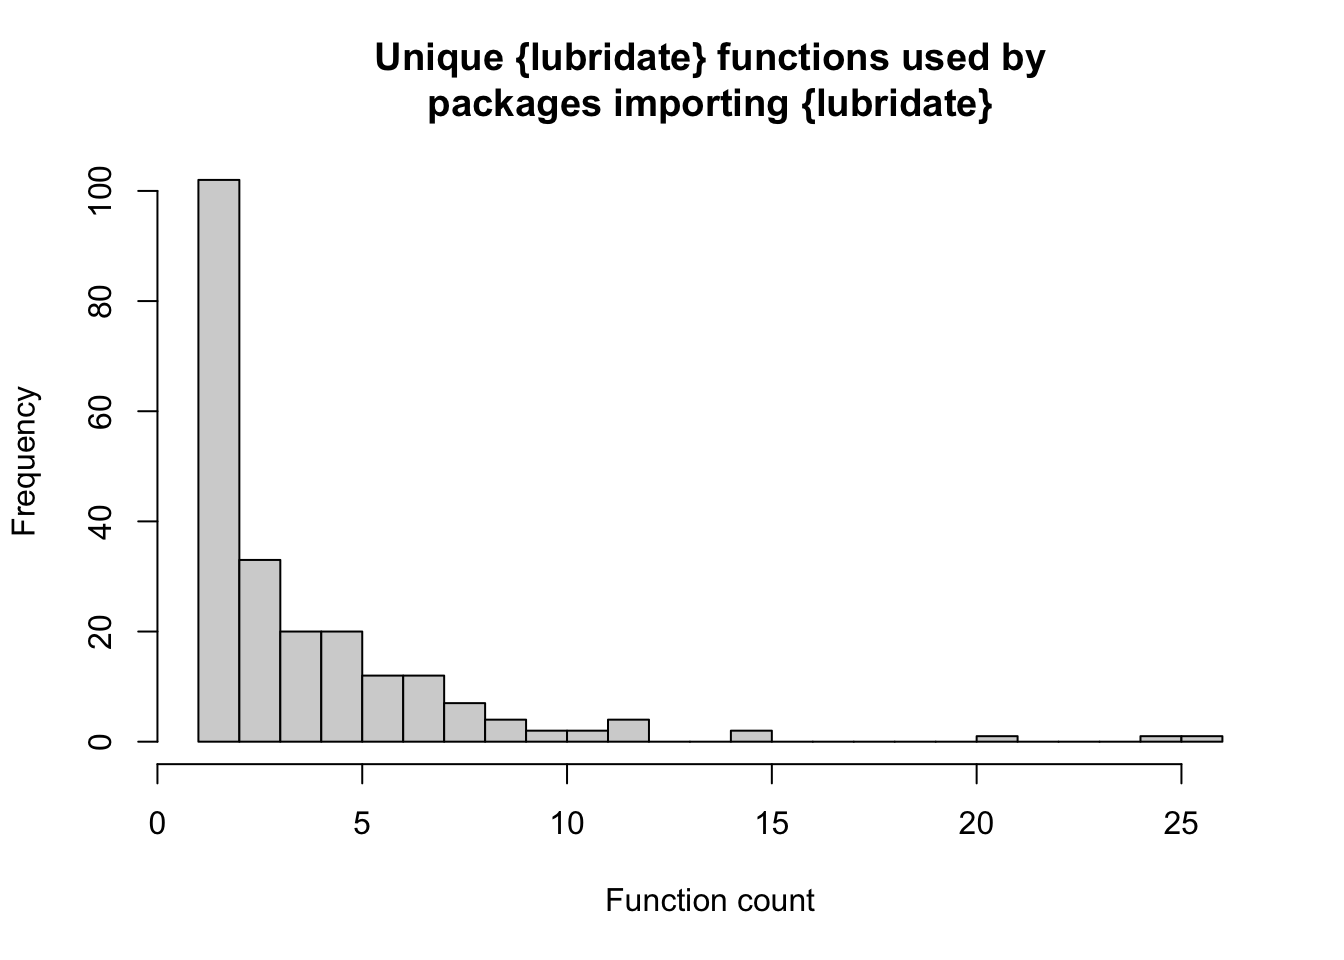 Histrogram of unique lubridate functions used by the packages that import lubridate. The vast majority are using 1 or 2, with a long tail out to about 25.